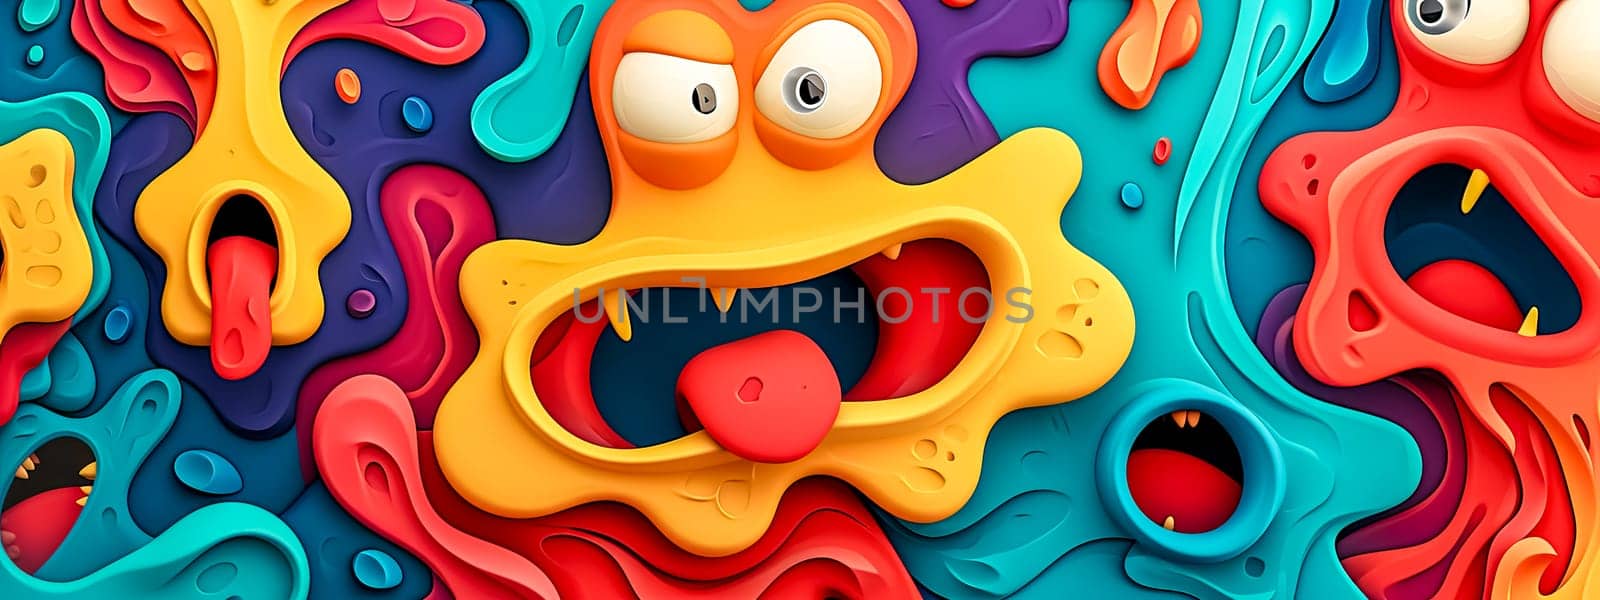 abstract design with various anthropomorphic shapes resembling expressive cartoon faces in a seamless pattern